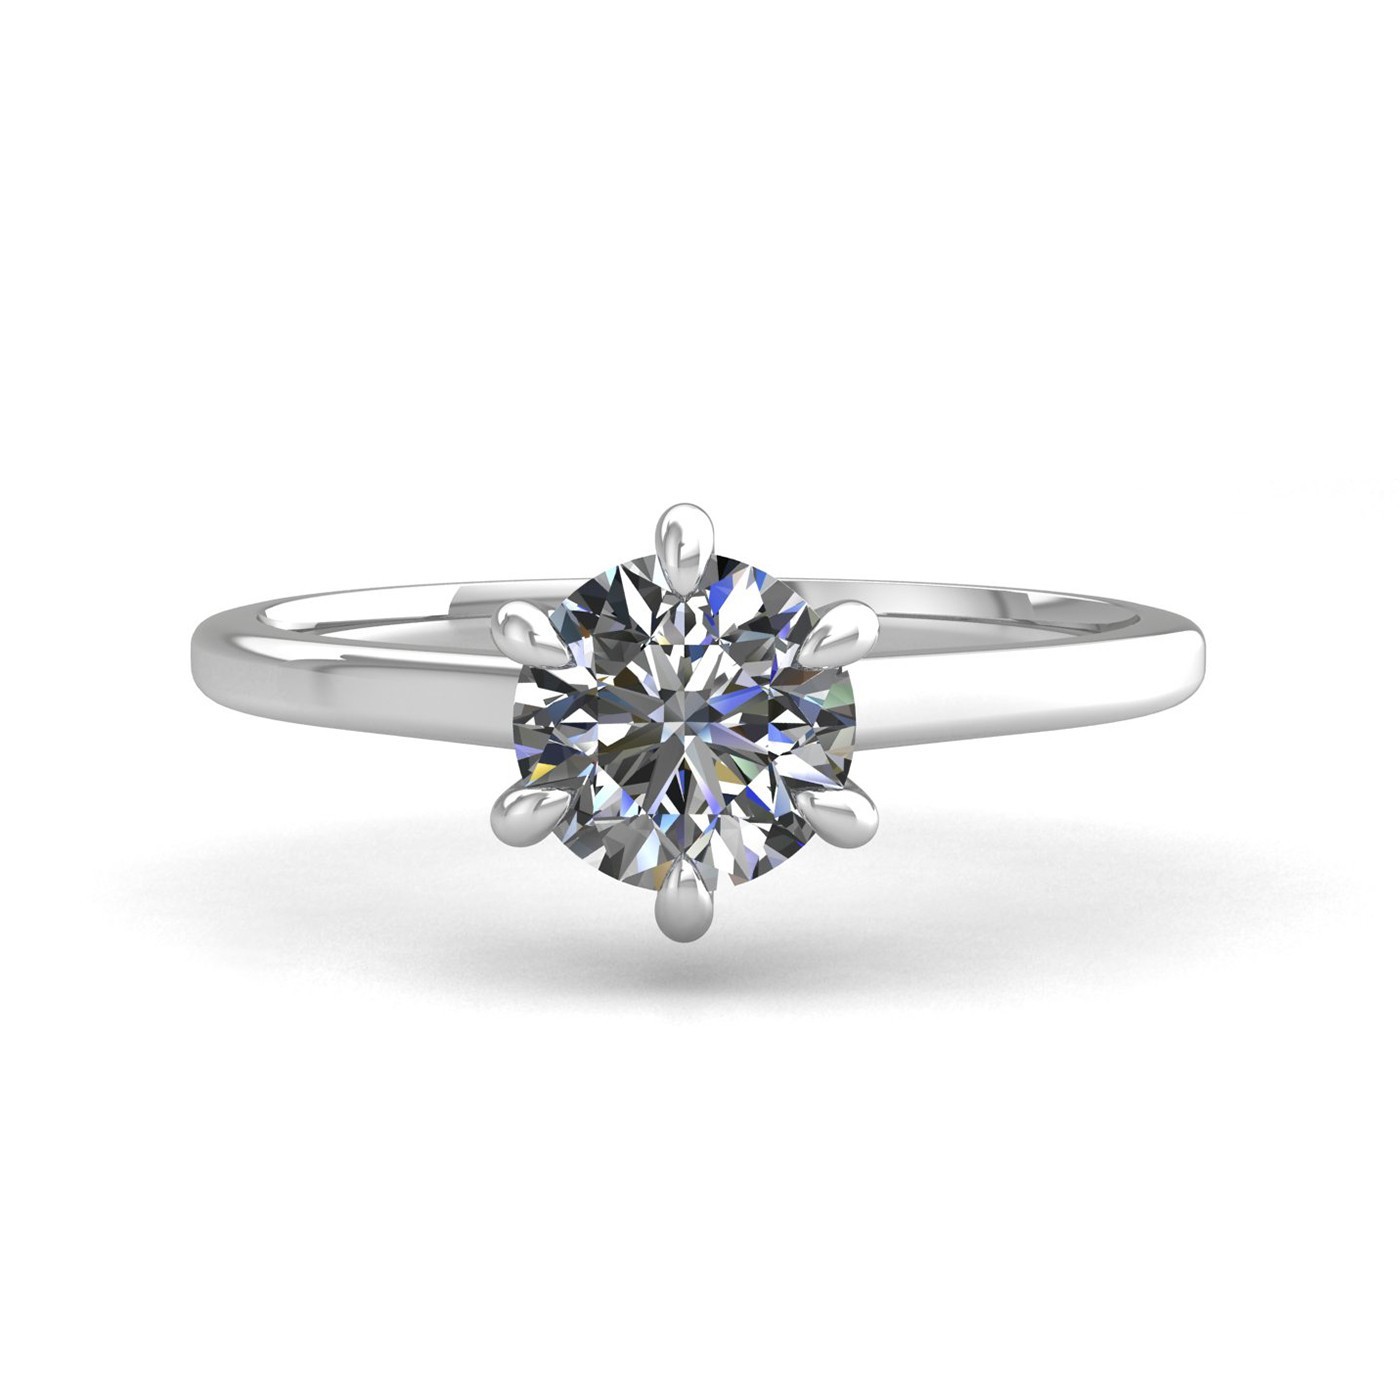 18k white gold 1,20 ct 6 prongs solitaire round cut diamond engagement ring with whisper thin band Photos & images